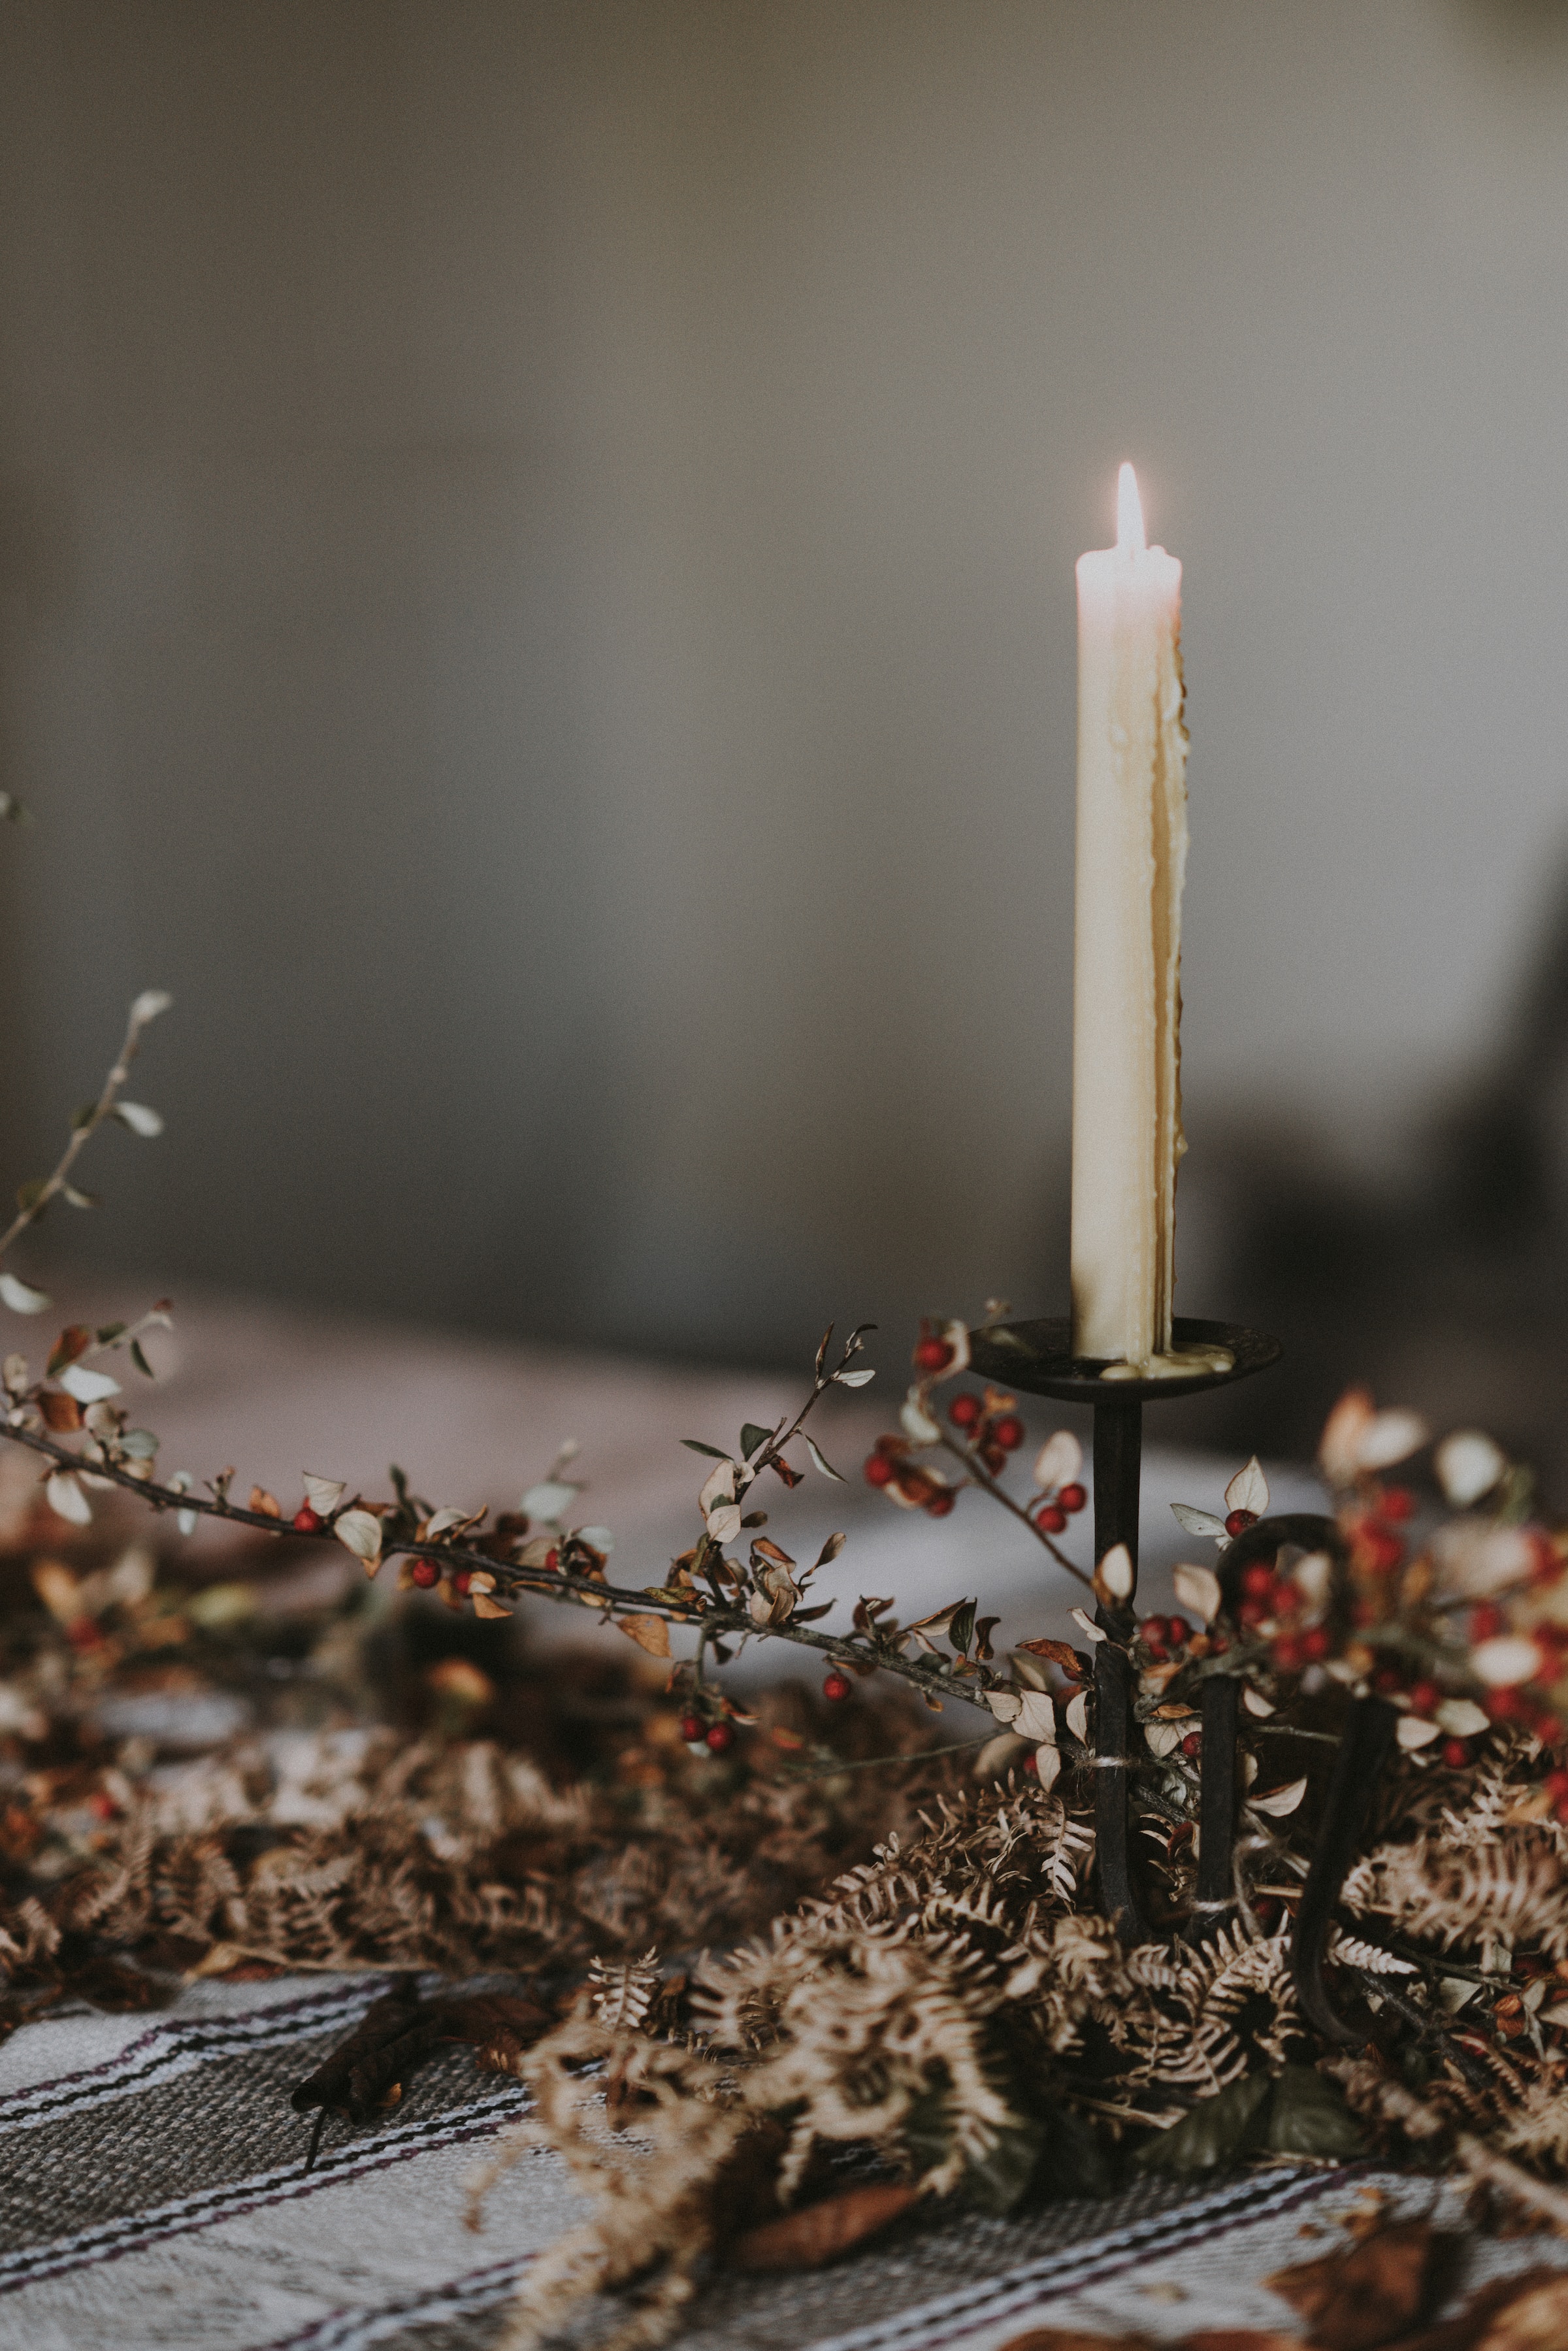 A lighted candle on a candlestick is placed on a table | Source: Unsplash